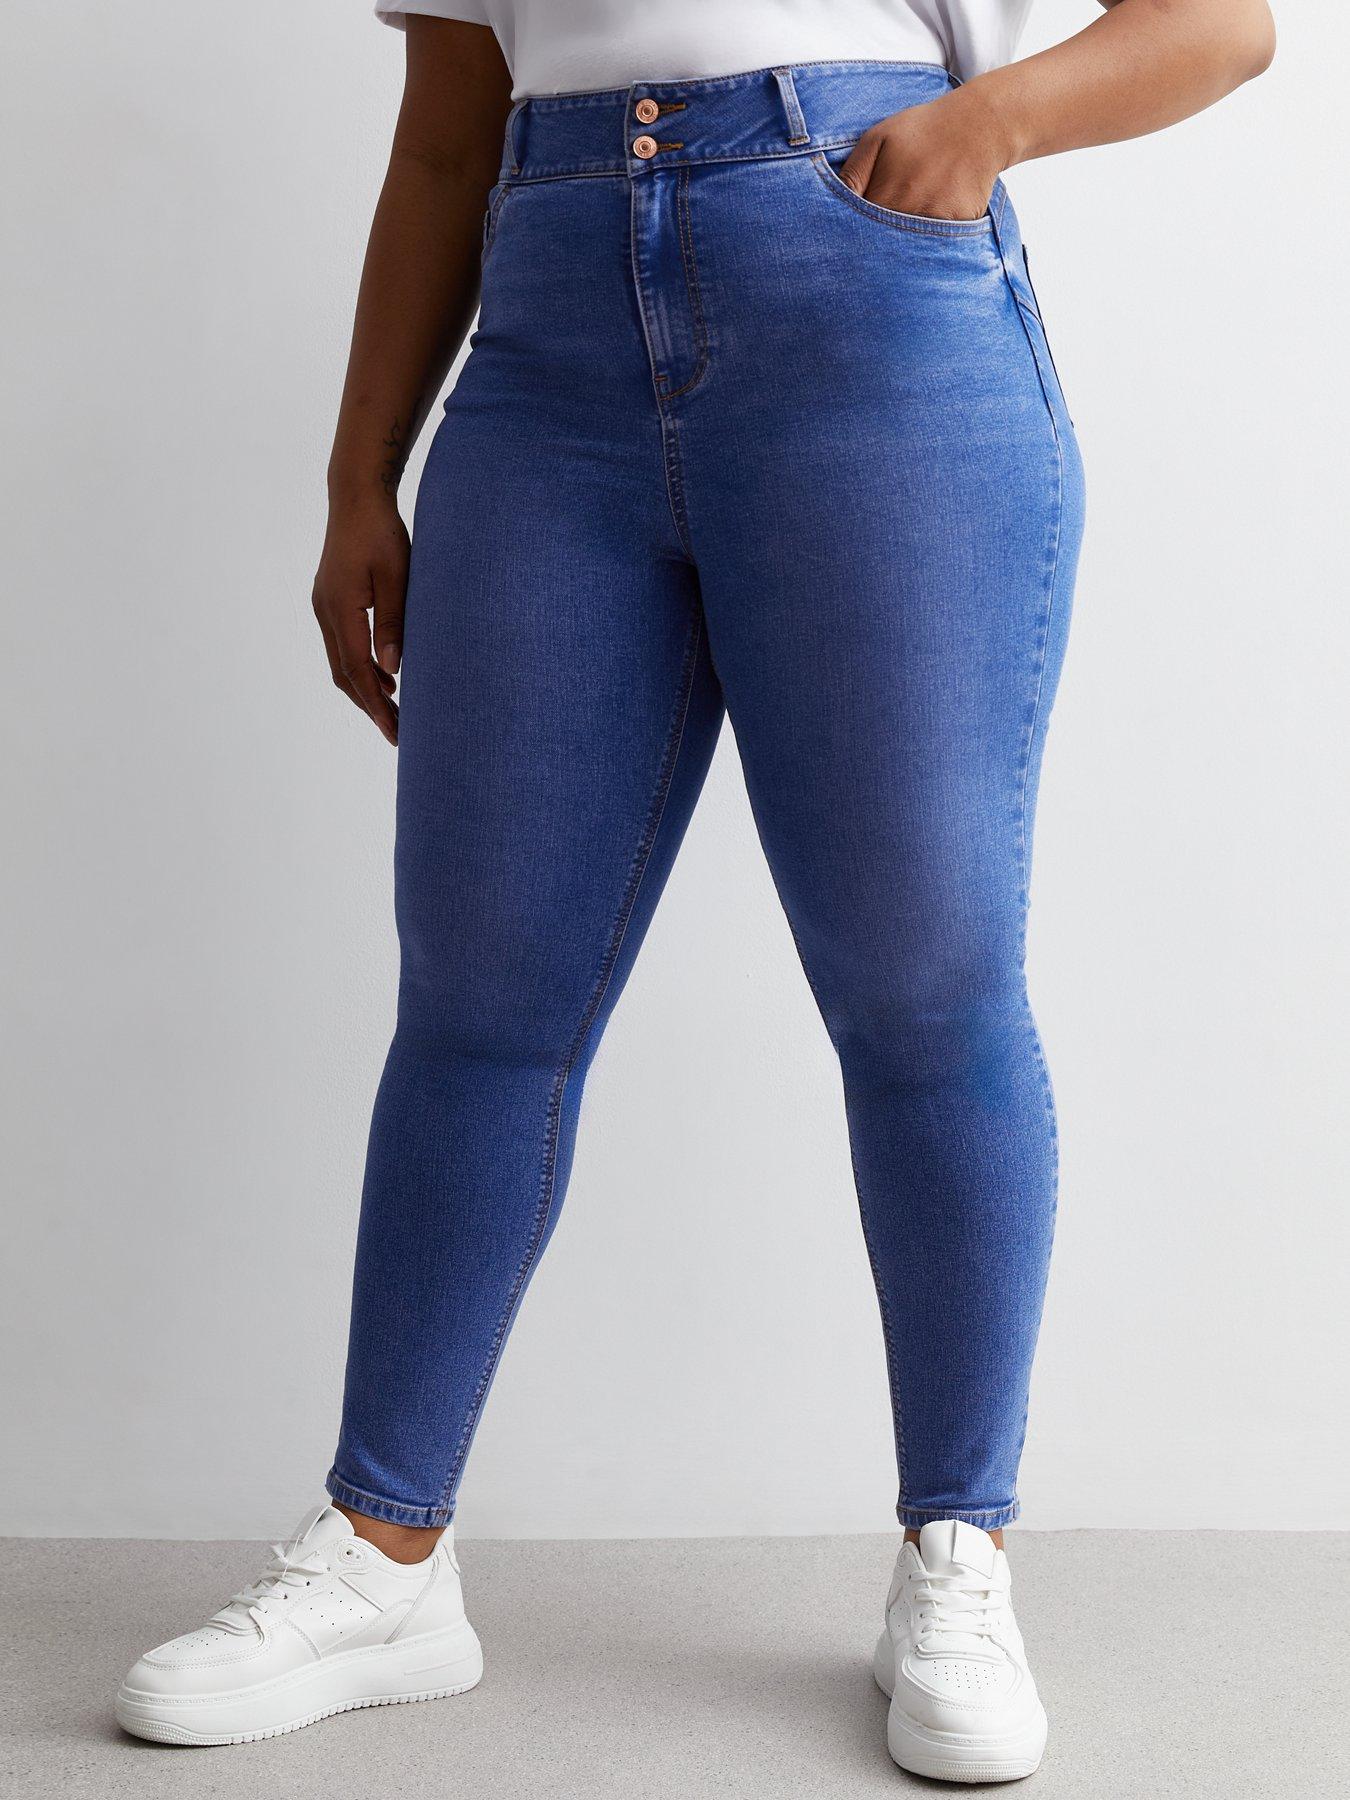 Bright Blue Mid Rise Lift & Shape Emilee Jeggings, New Look